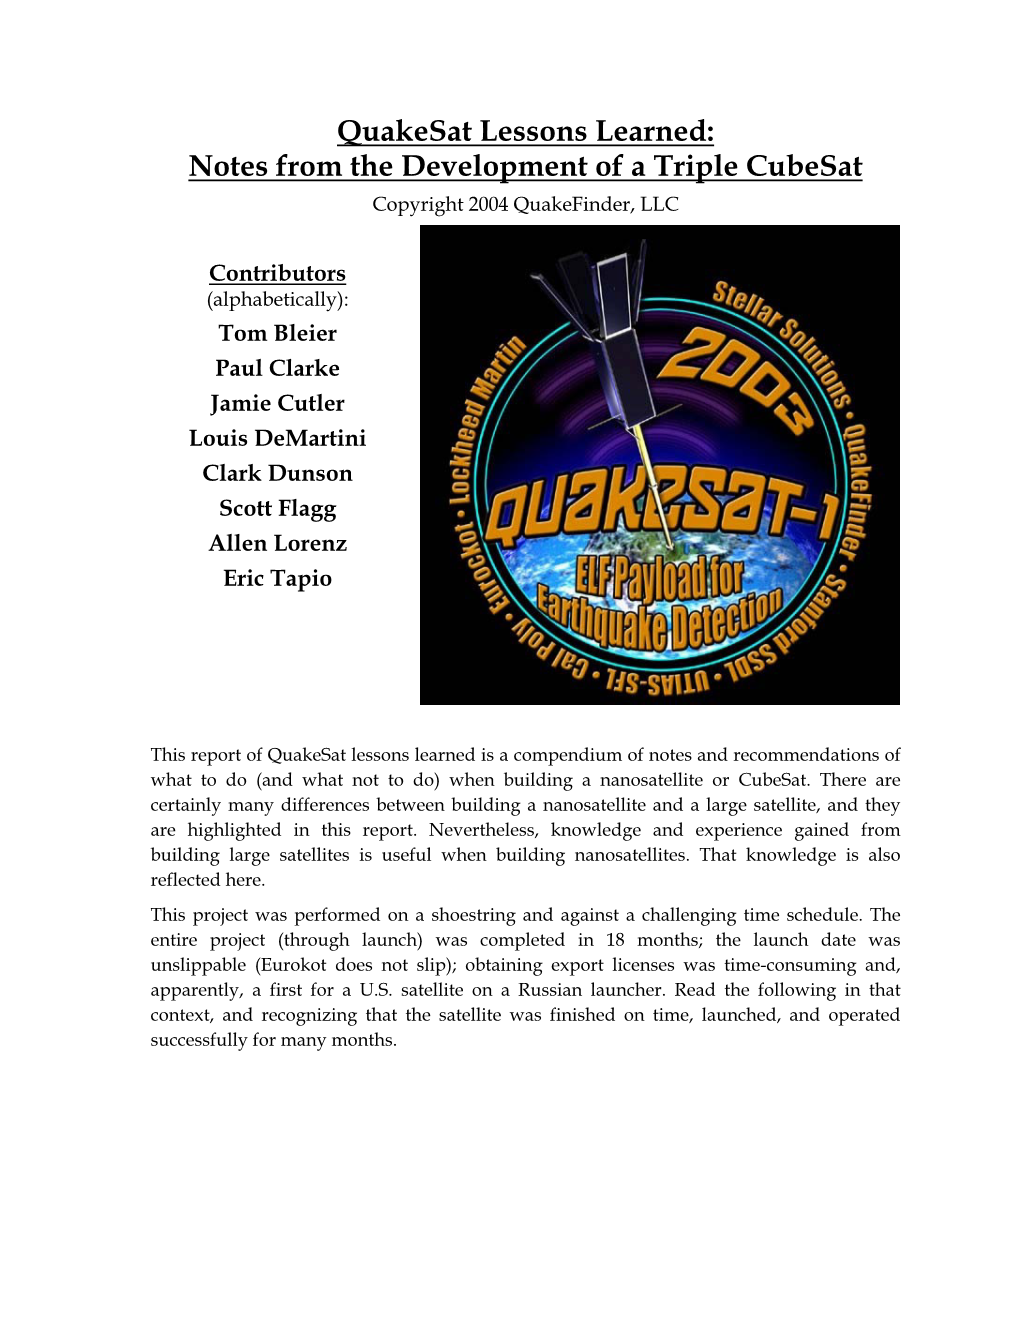 Quakesat Lessons Learned: Notes from the Development of a Triple Cubesat Copyright 2004 Quakefinder, LLC